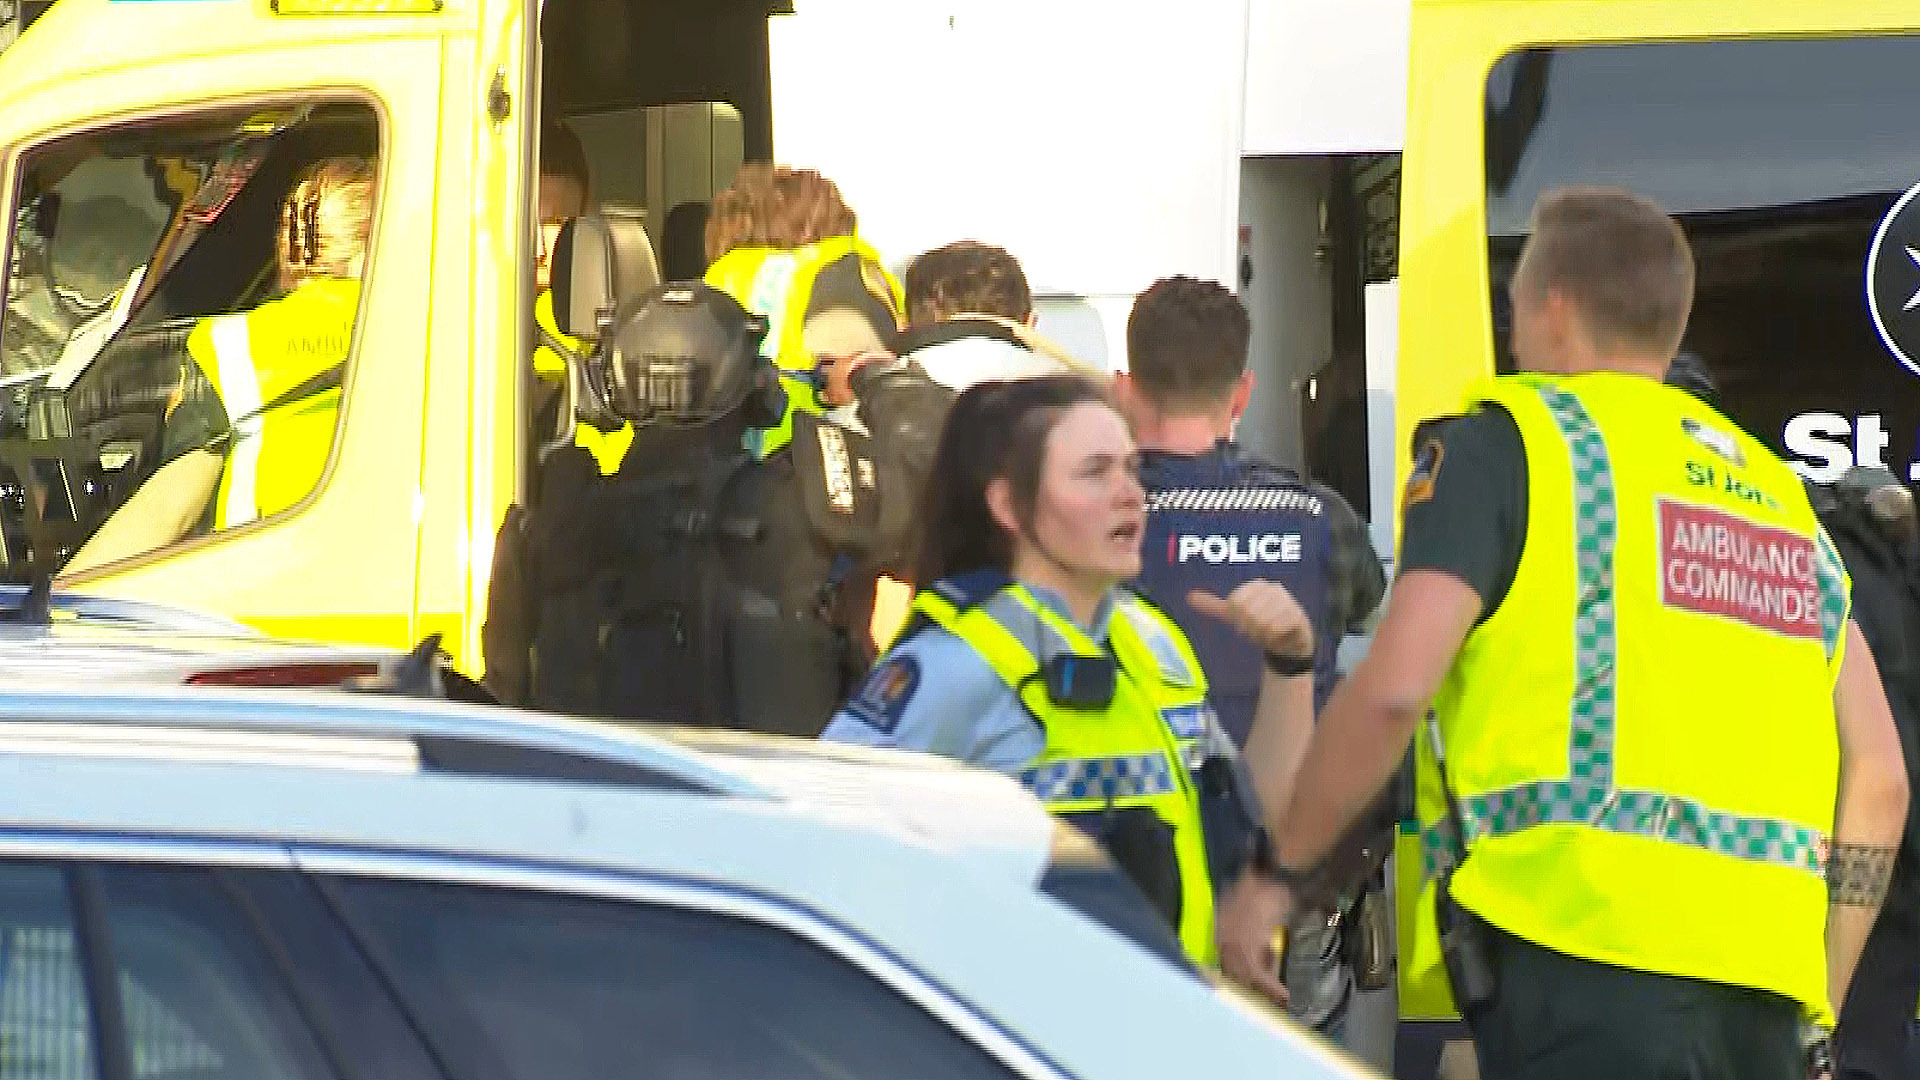 I saw a bloody hard hat' - Witness describes hiding from Akl gunman